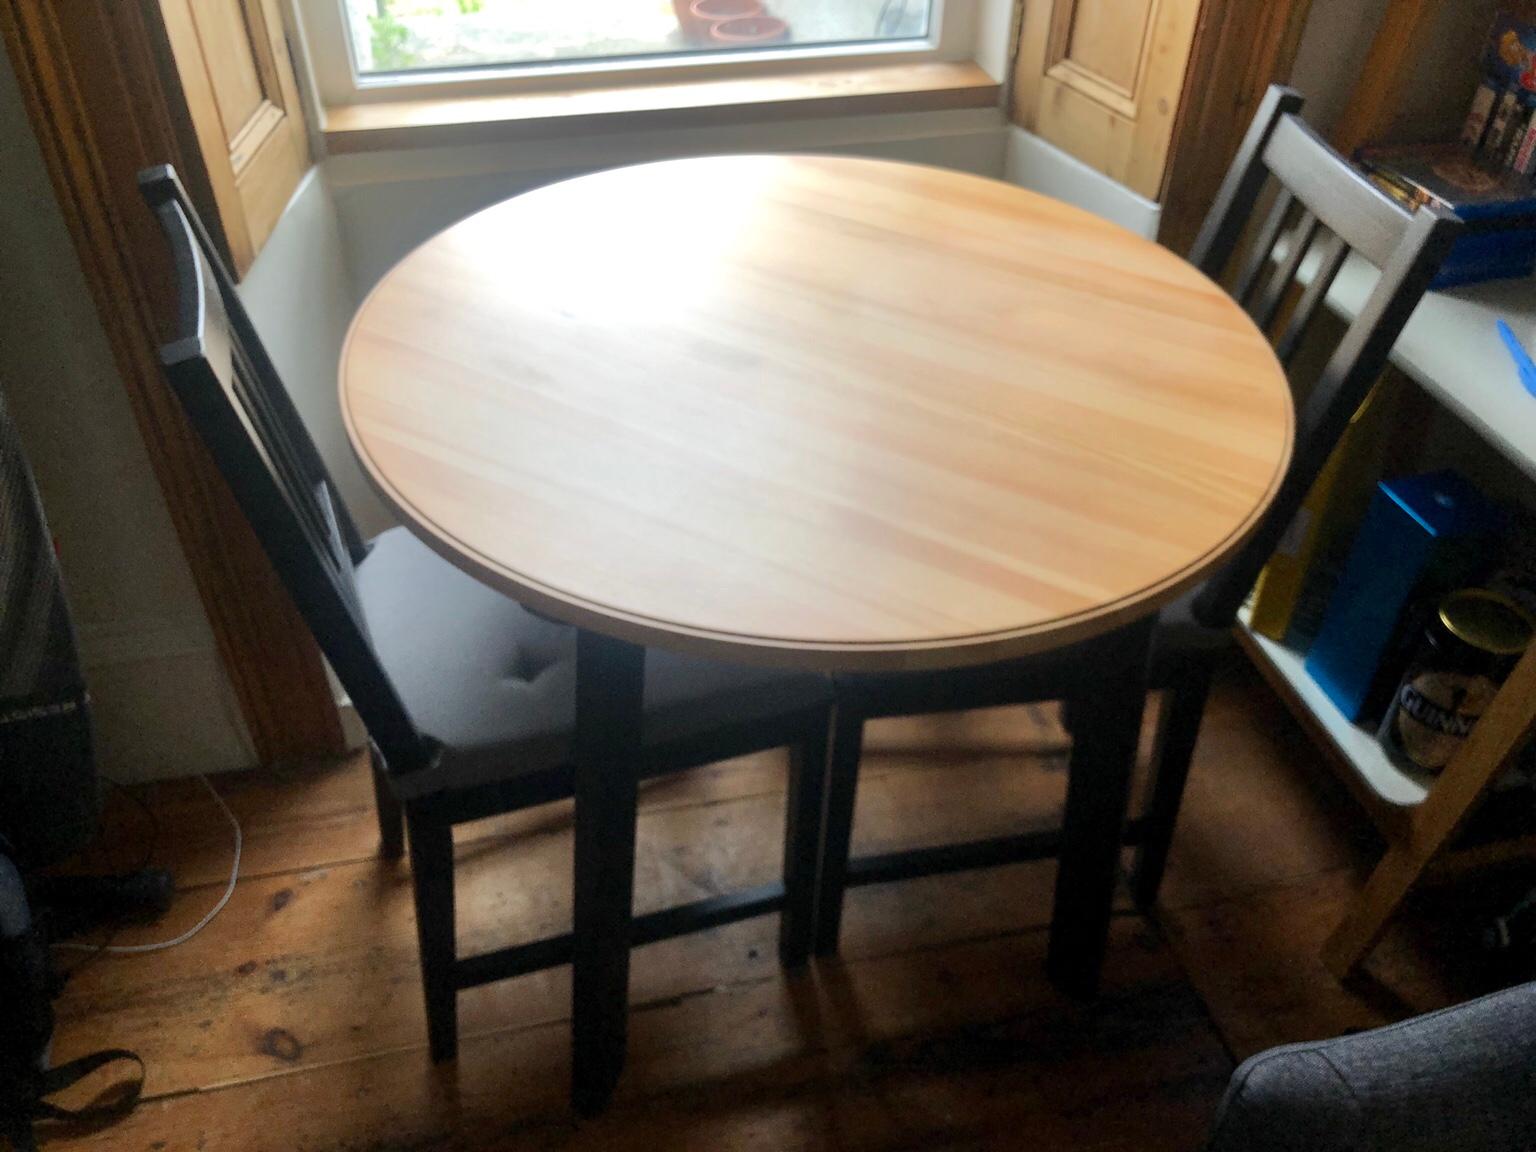 Ikea Round Dining Table Chairs In Ex4 Exeter For 90 00 For Sale Shpock